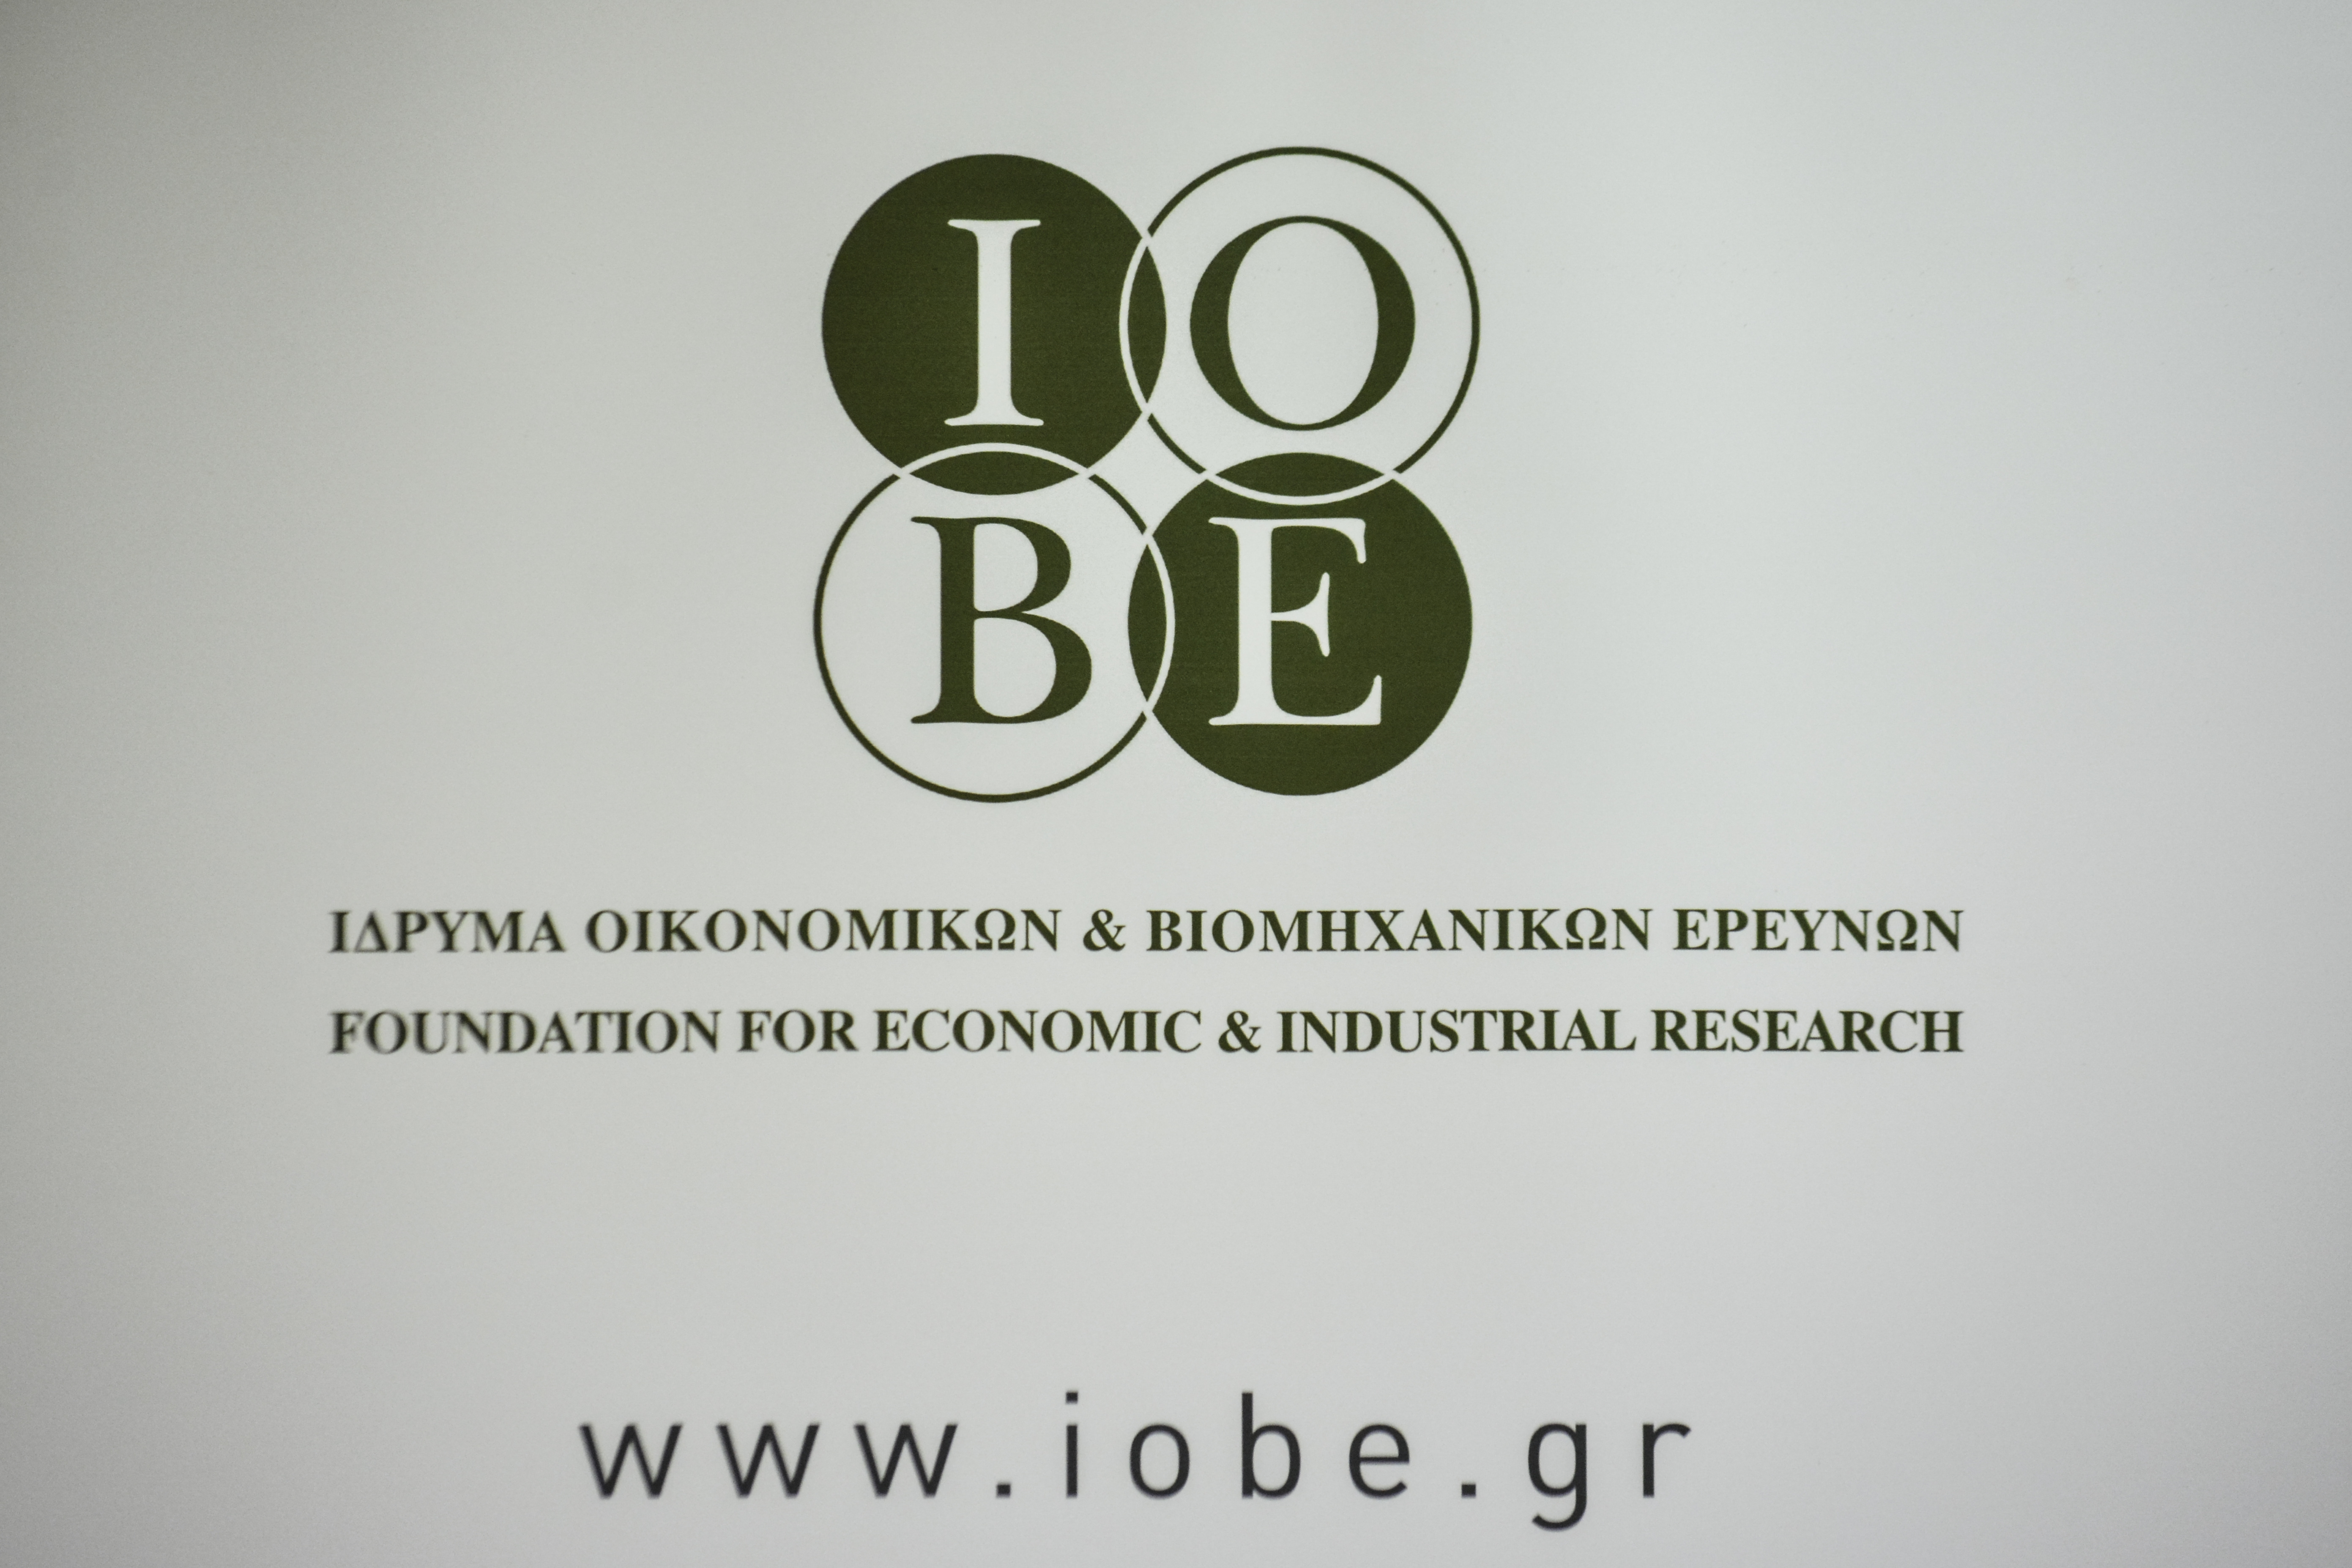 Economic, Industrial Research Foundation: improved economic climate in April